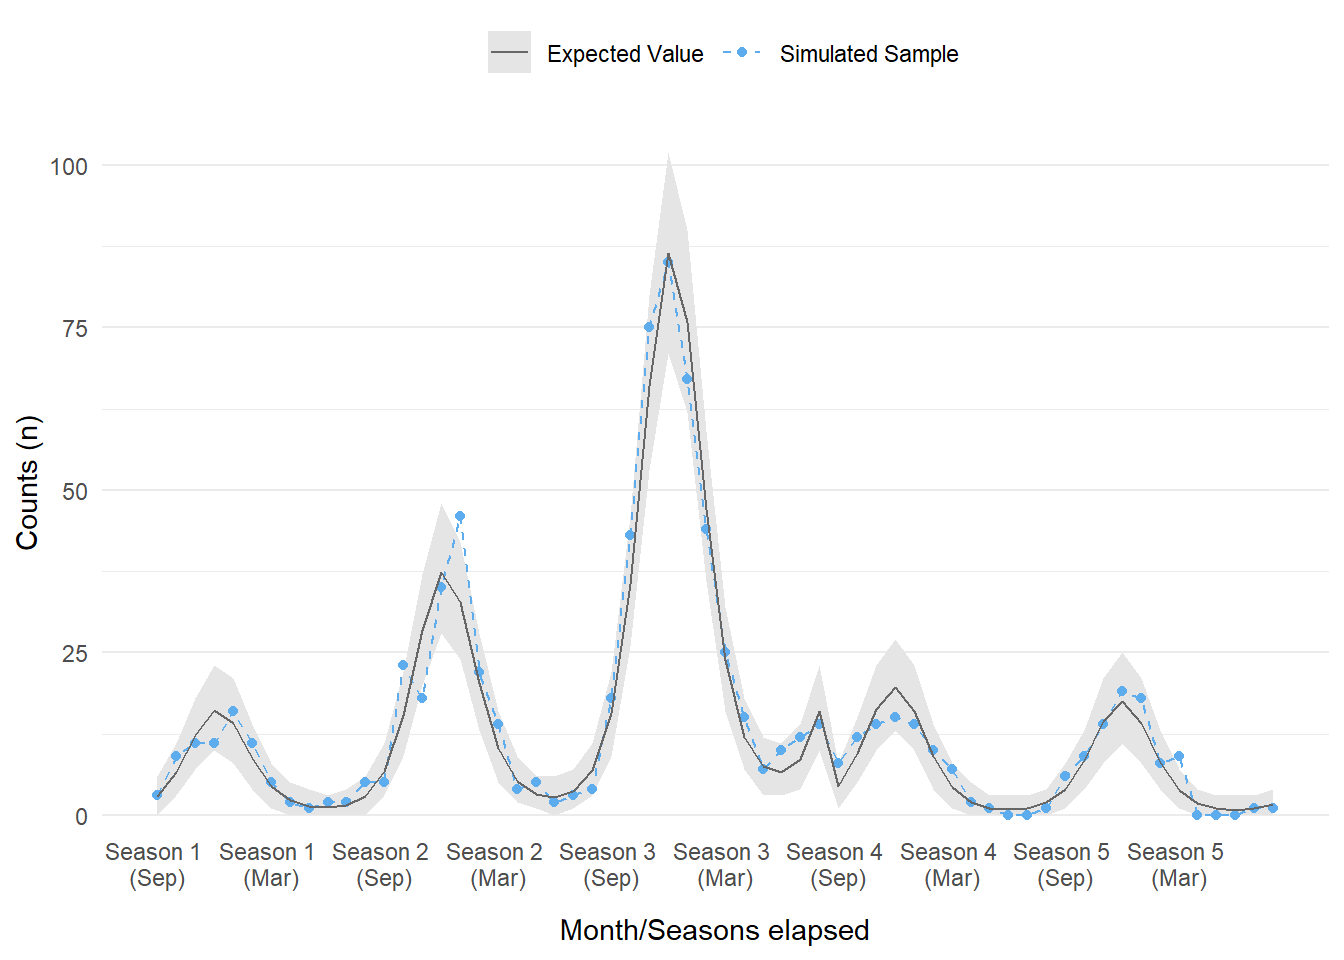 The modeled and simulated sample for case counts over a five year period. Each season starts in September, with season 4 being the start of the intervention.